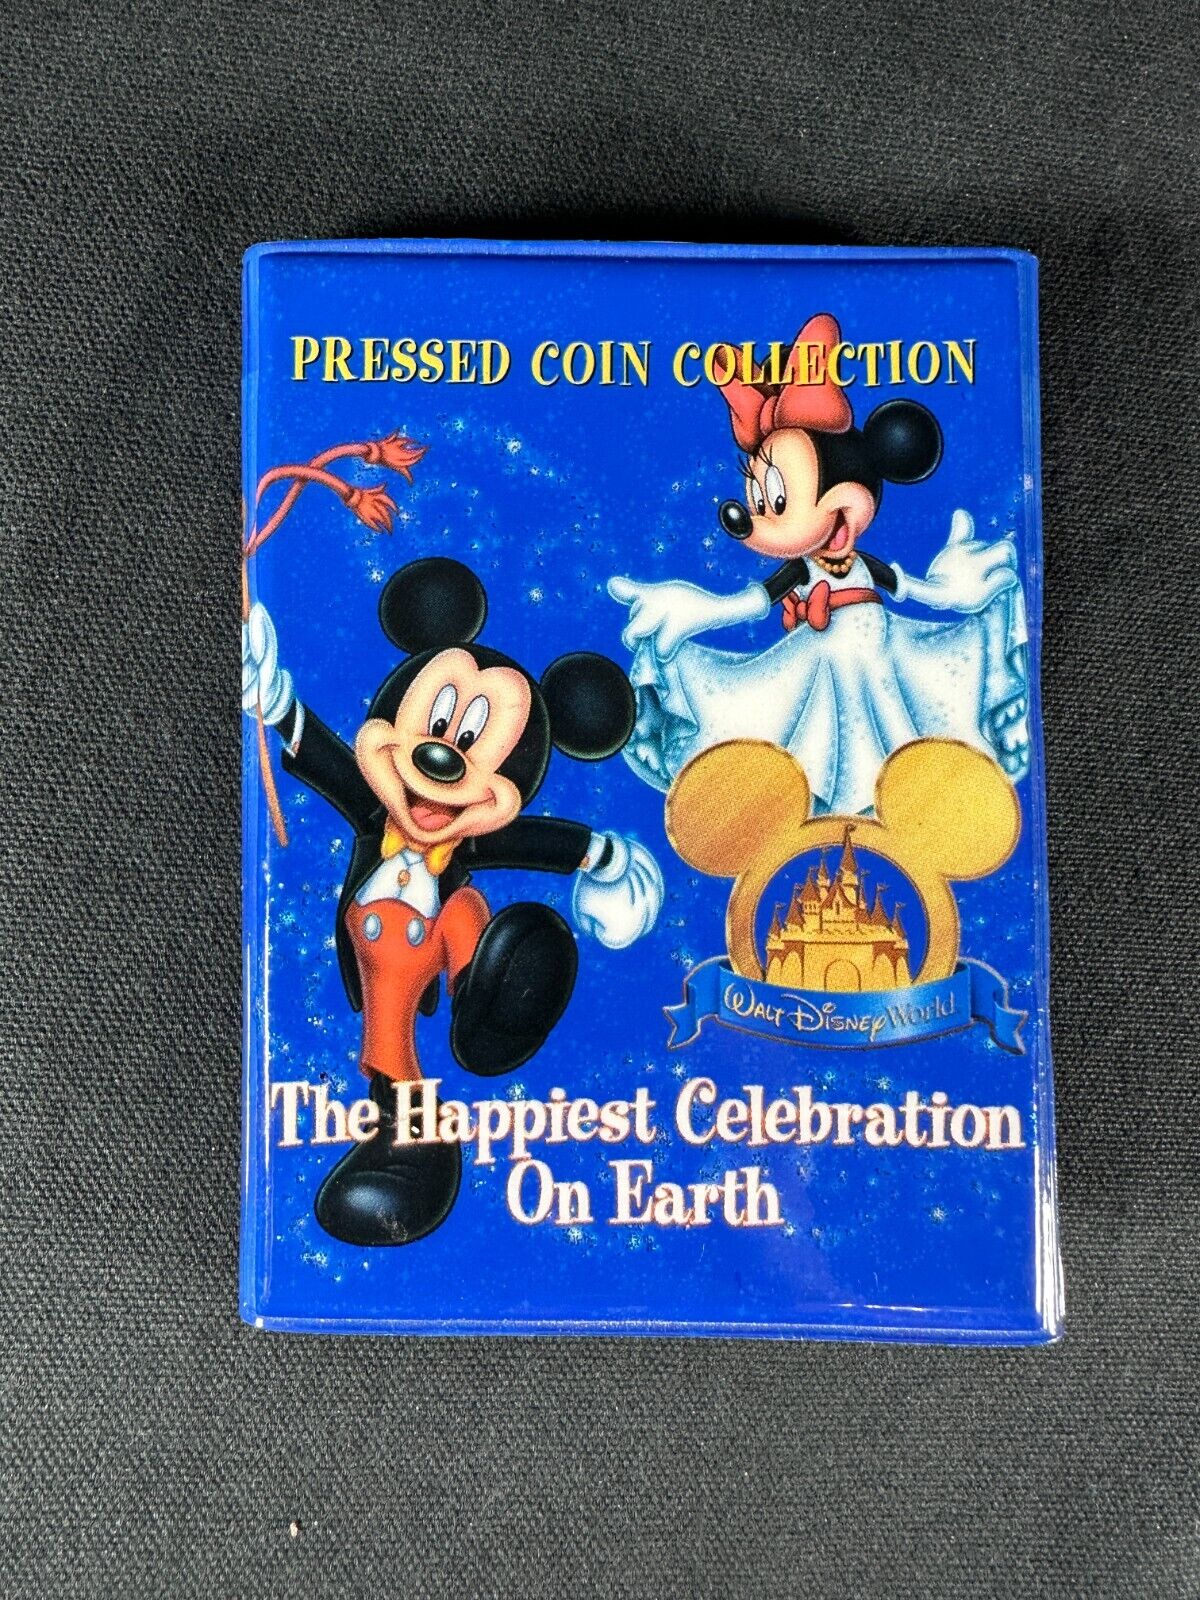 Disney pressed-squashed penny book Happiest Celebration on Earth